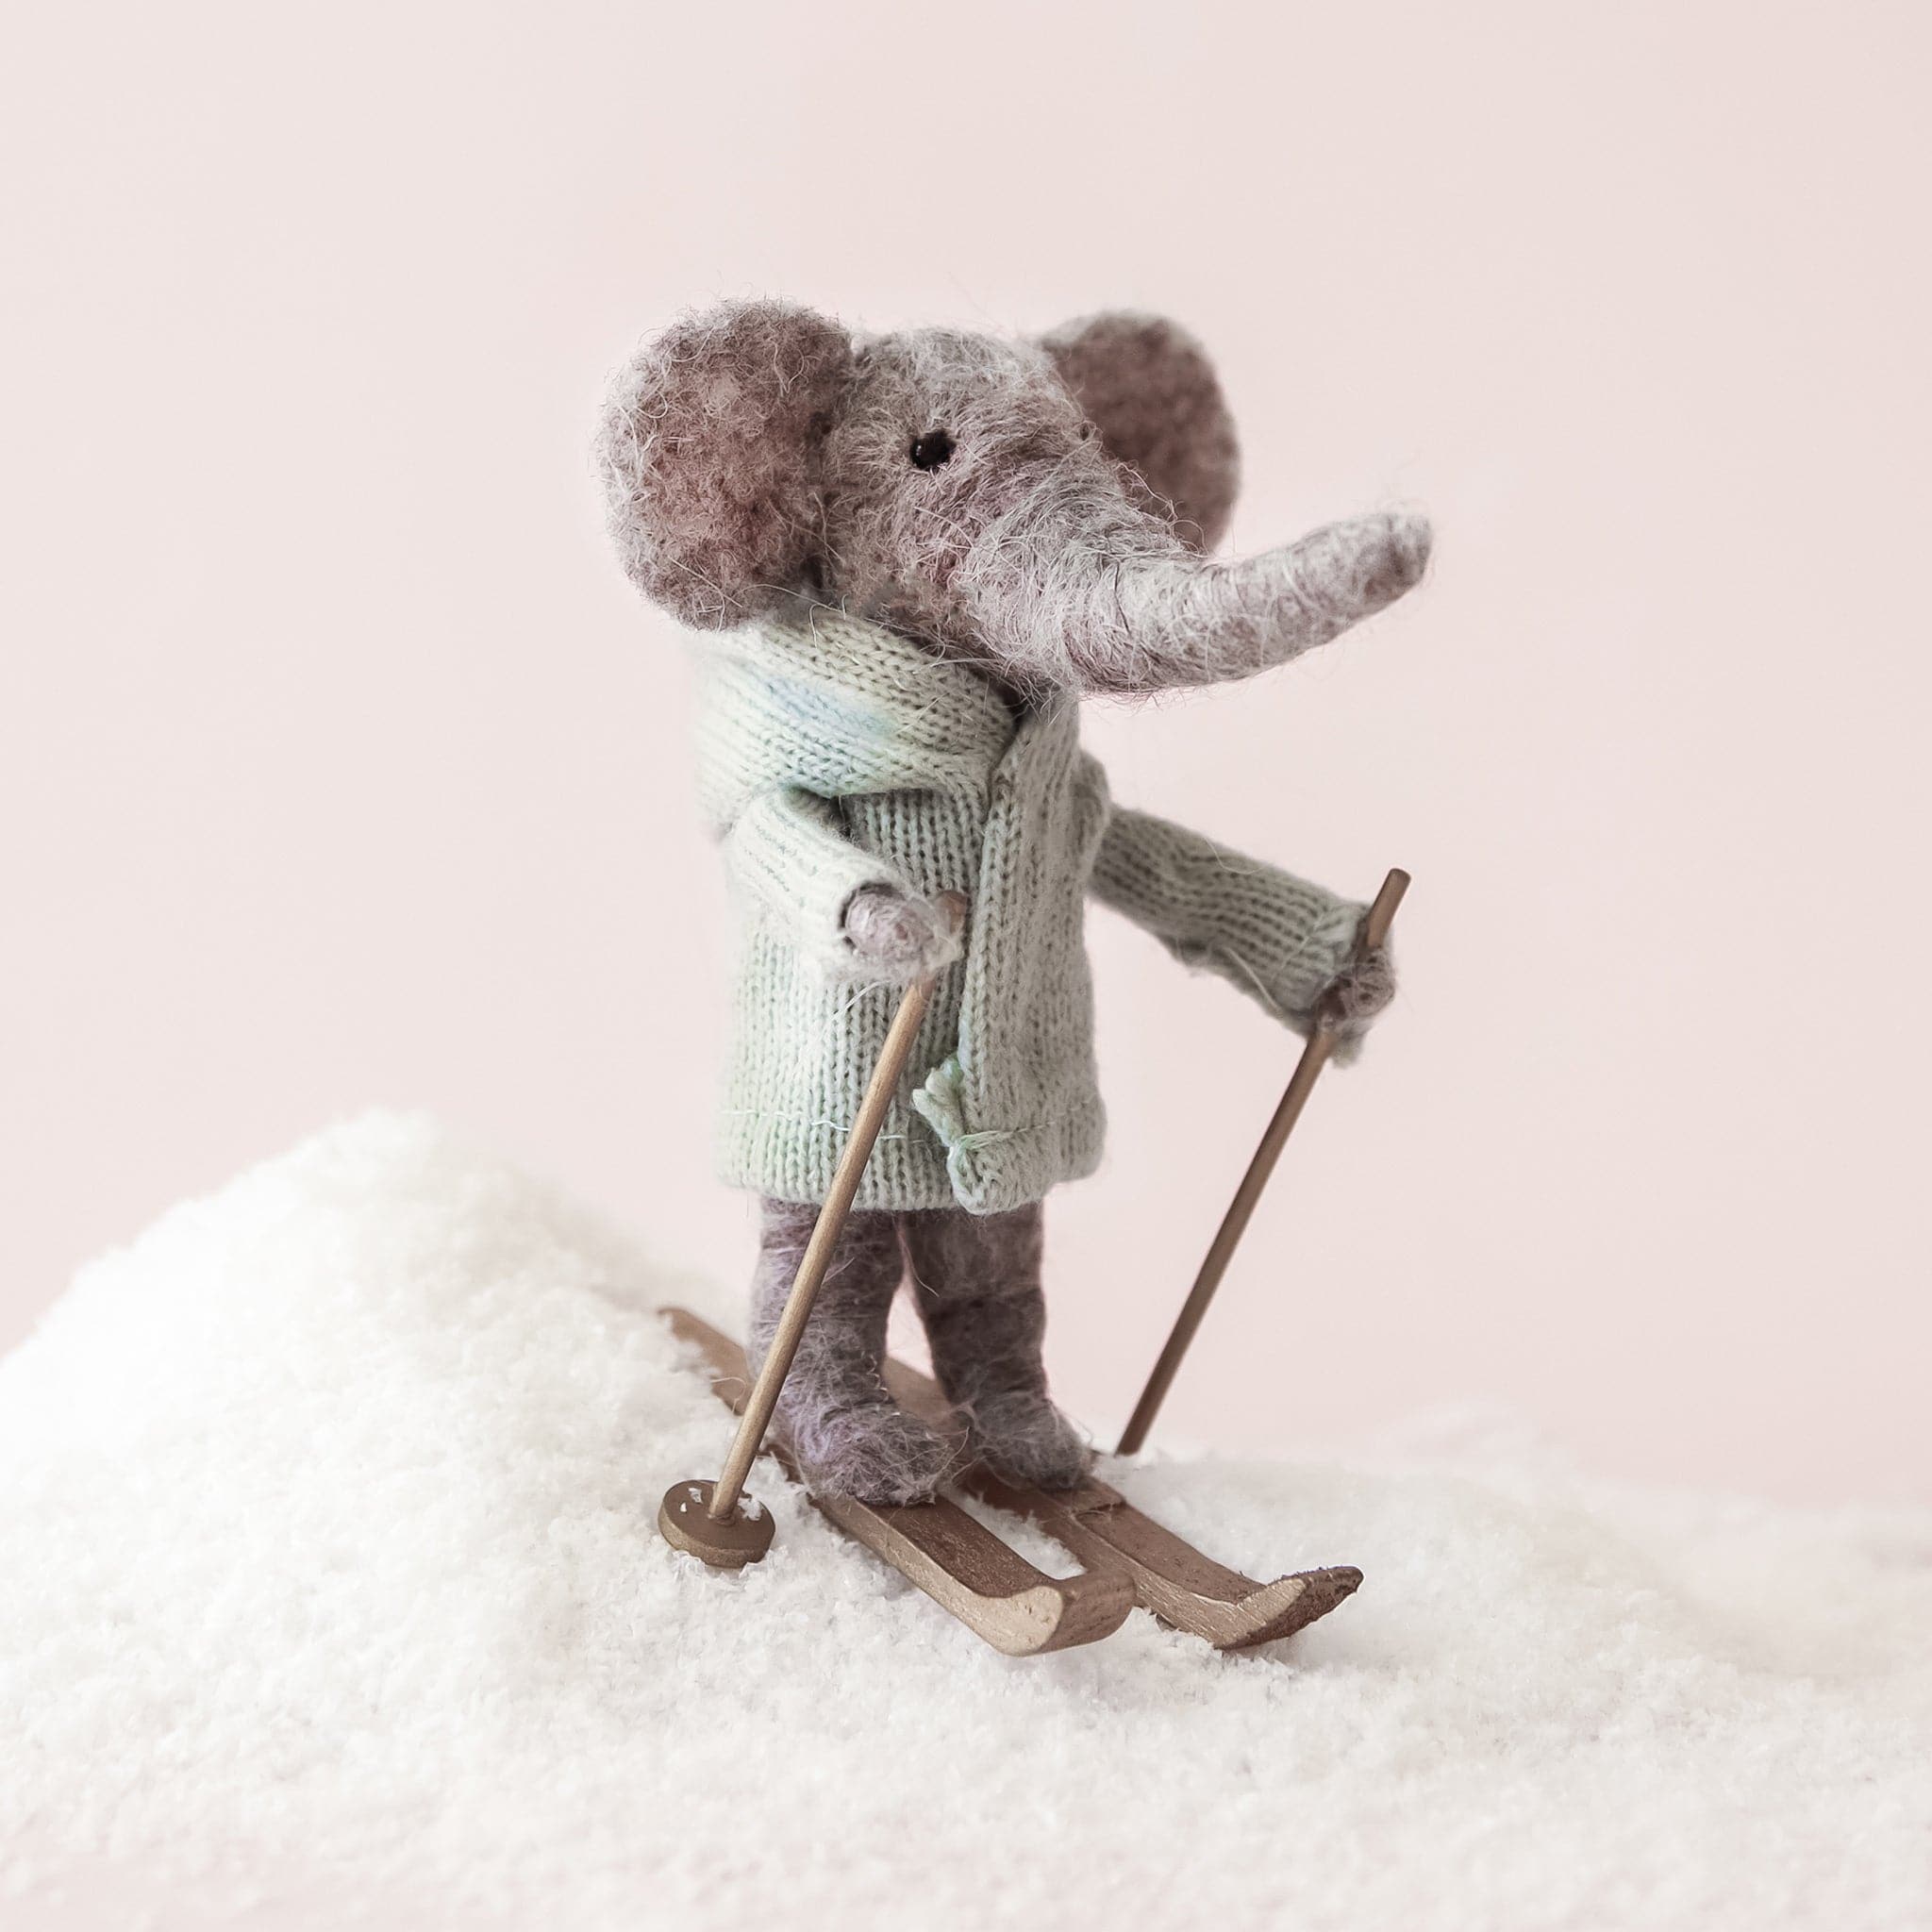 Sitting on a hill of fake snow in front of a pink background is a felt elephant ornament. The elephant is standing upright on his back legs. His feet are on a pair of brown skis and is holding a ski pole in each hand. The elephant is gray with a long, gray trunk and two gray ears. He is wearing a sage green sweater. 